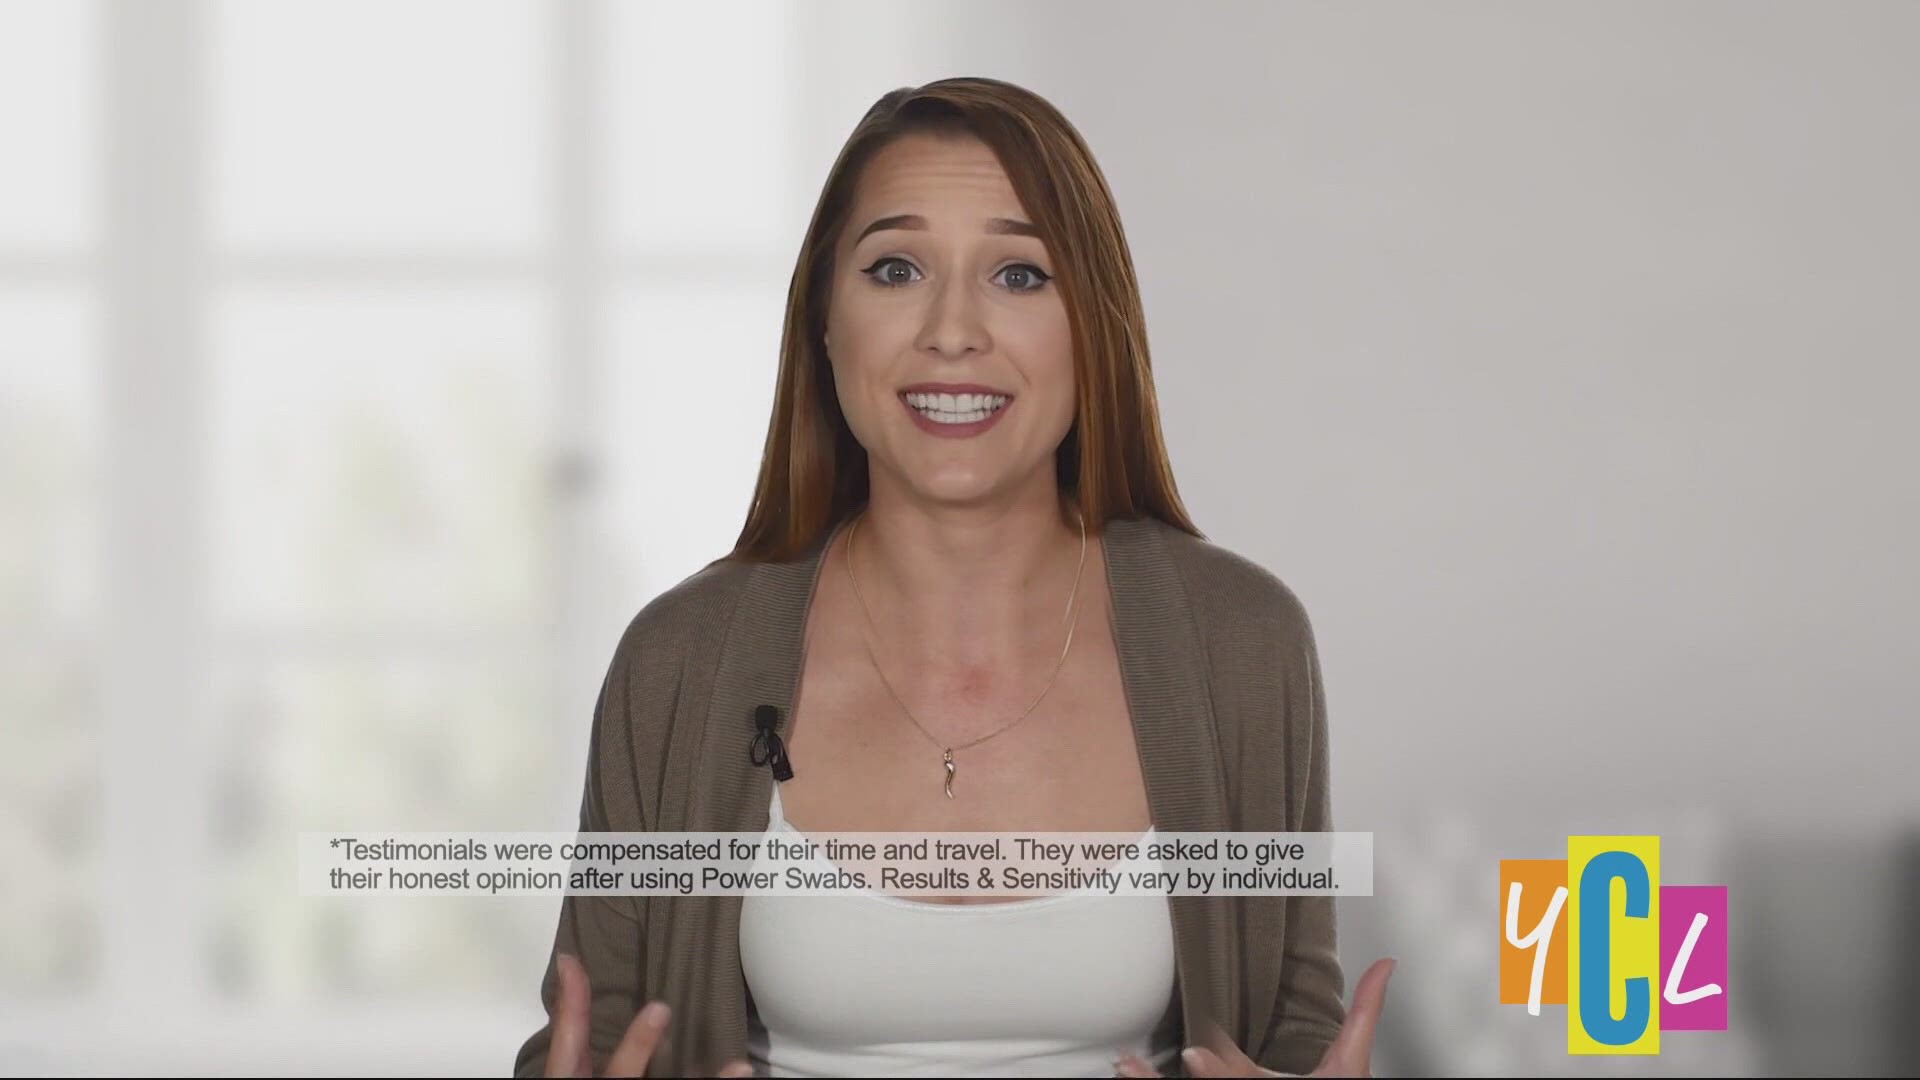 Check out how you could get your teeth six shades whiter in just seven days without messy strips or annoying trays! This segment was paid for by Power Swabs.